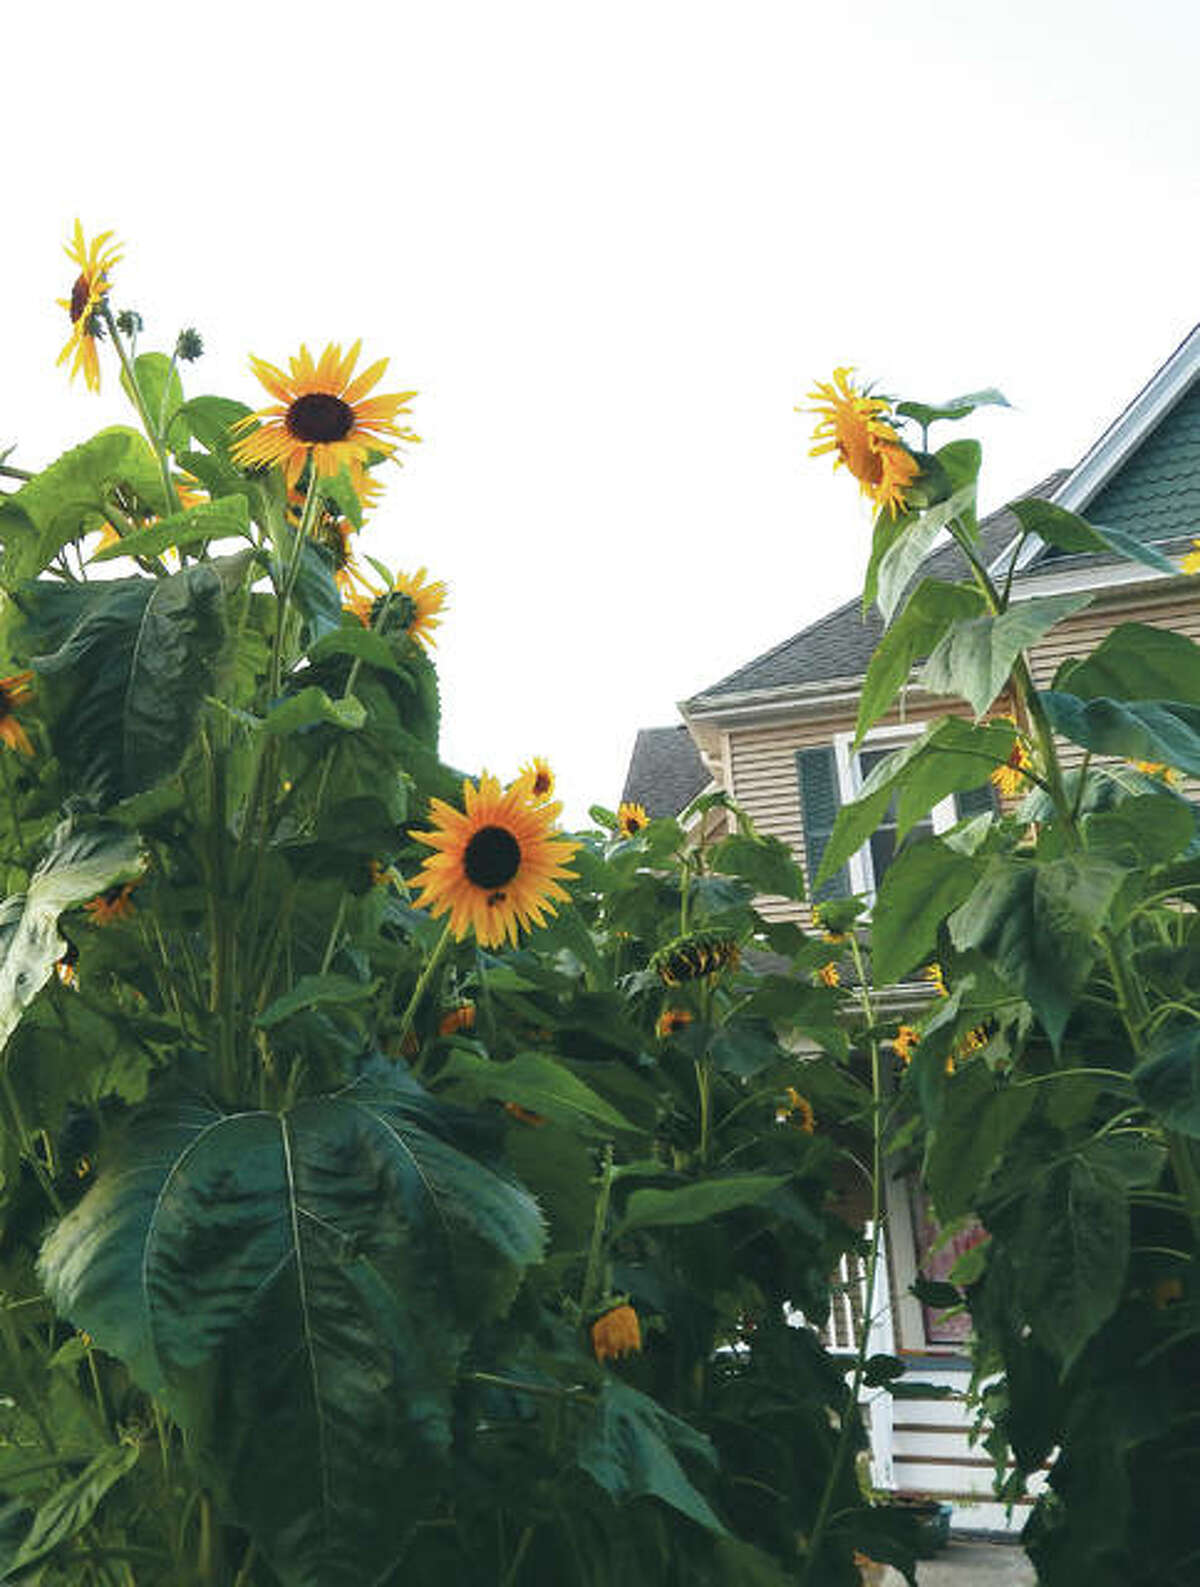 Sunflowers tower over the path leading to a house on West Lafayette Avenue between North Webster Avenue and Sandusky Street, their height easily dwarfing passing pedestrians. Depending on the variety, sunflowers can grow to be 14 feet tall or more.